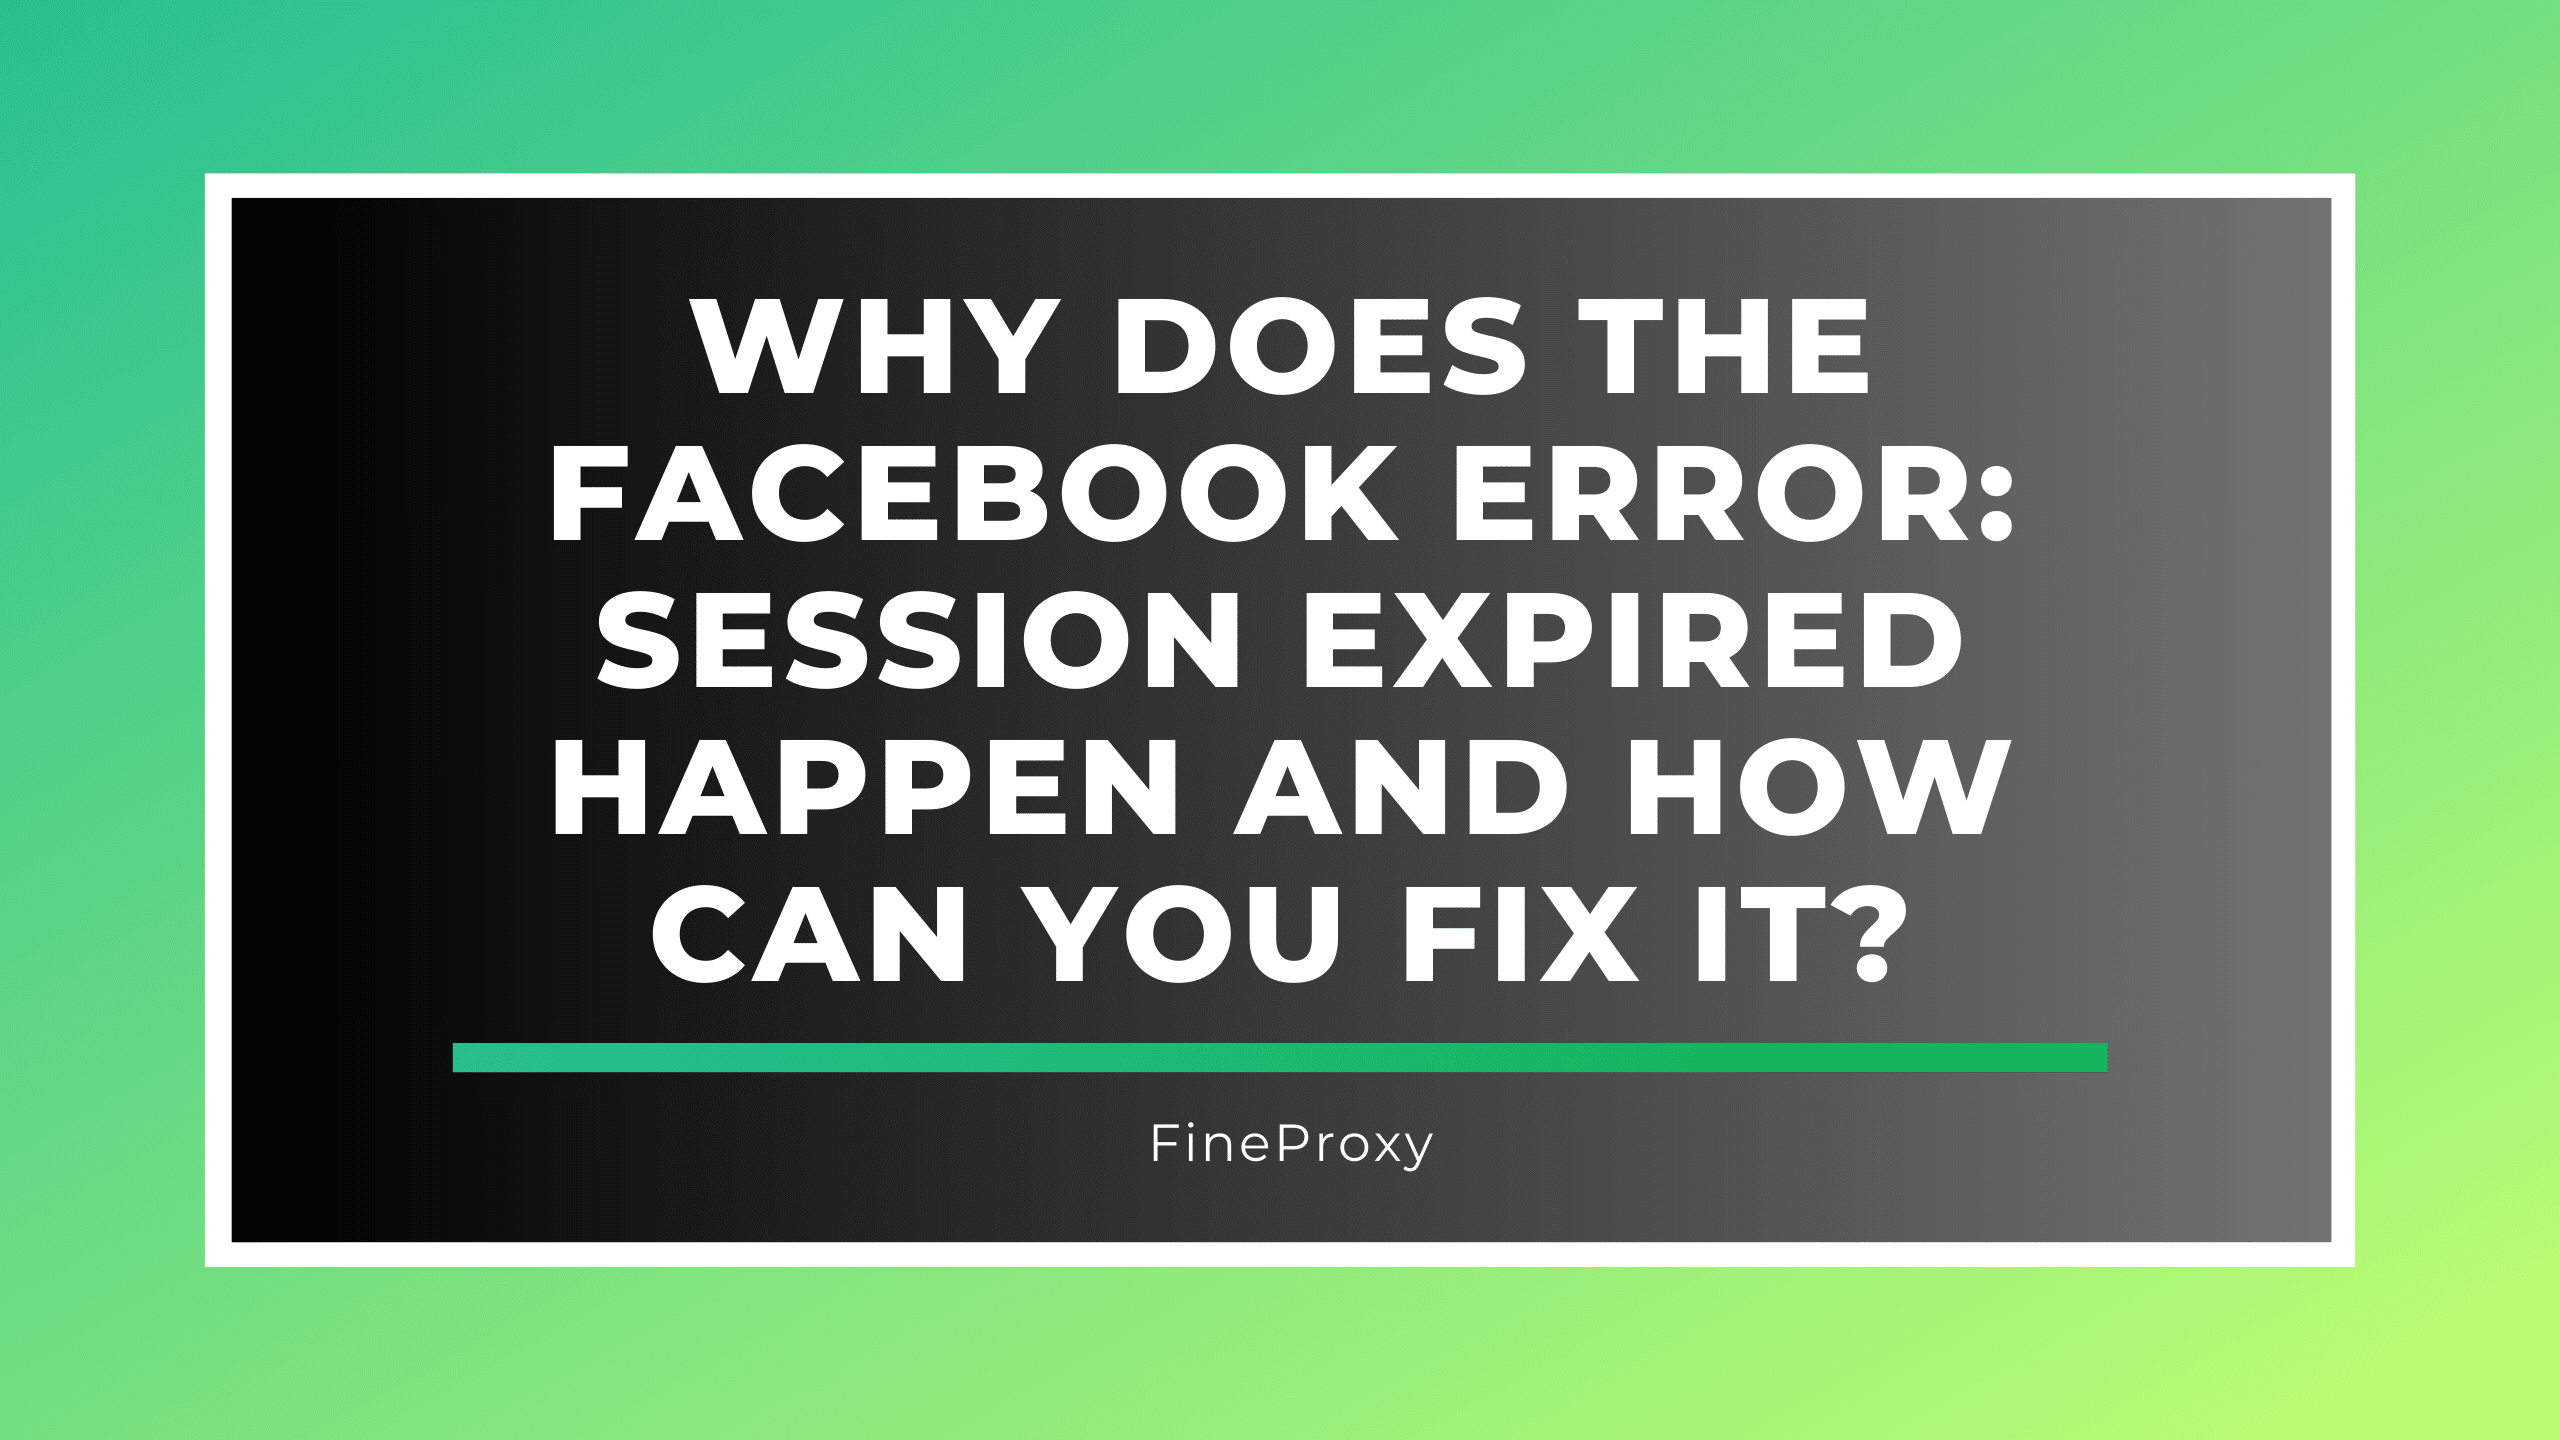 Why Does the Facebook Error: Session Expired Happen and How Can You Fix It?